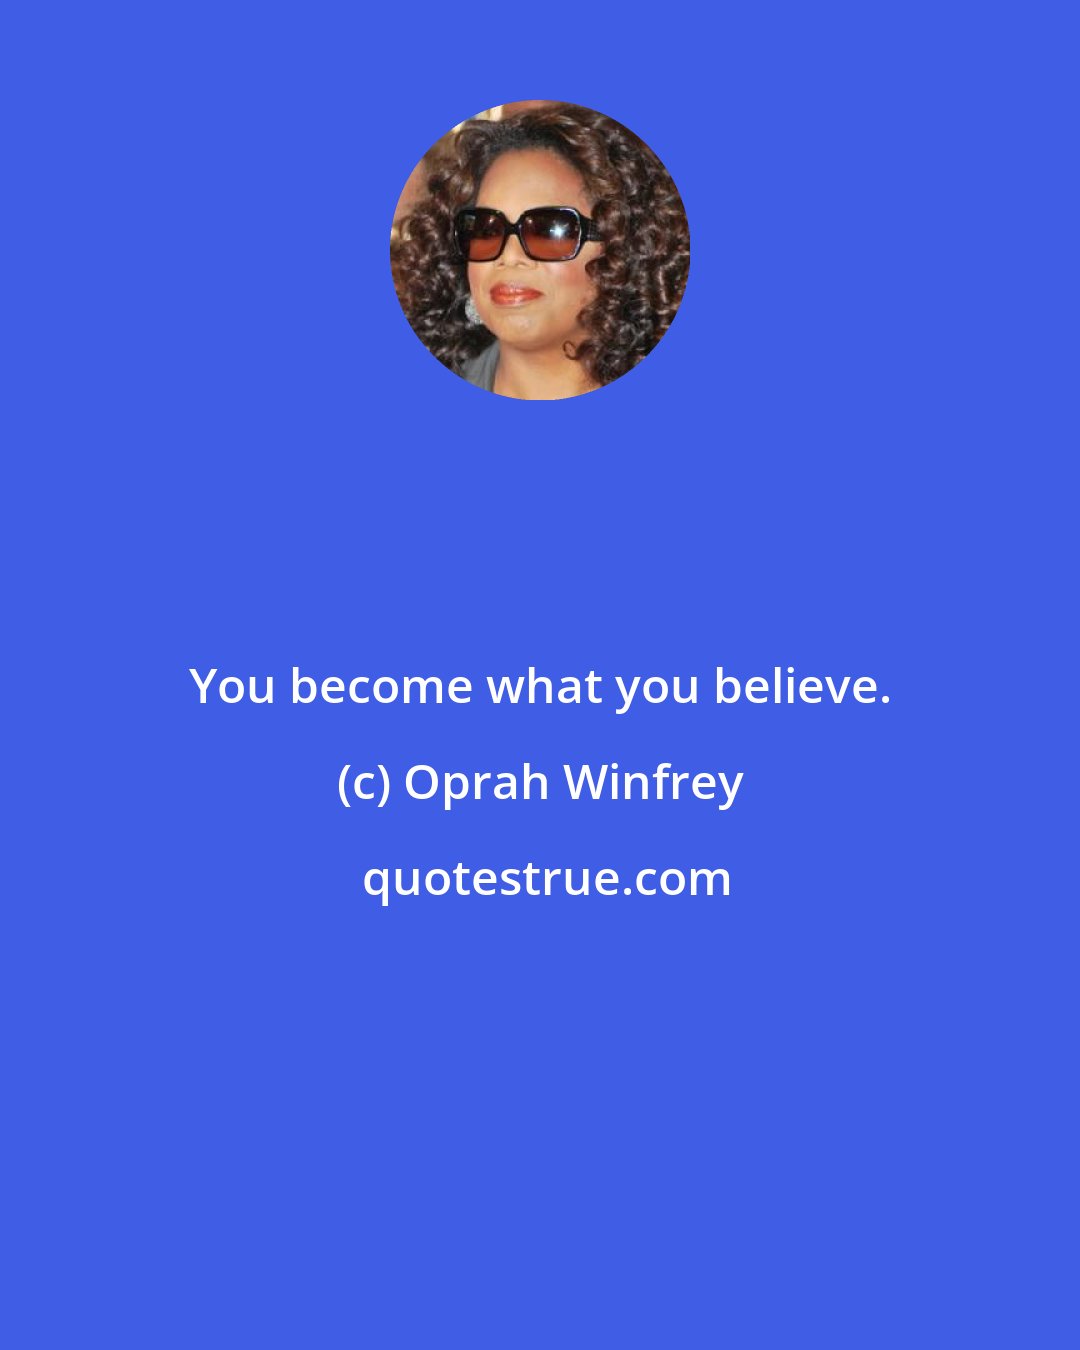 Oprah Winfrey: You become what you believe.